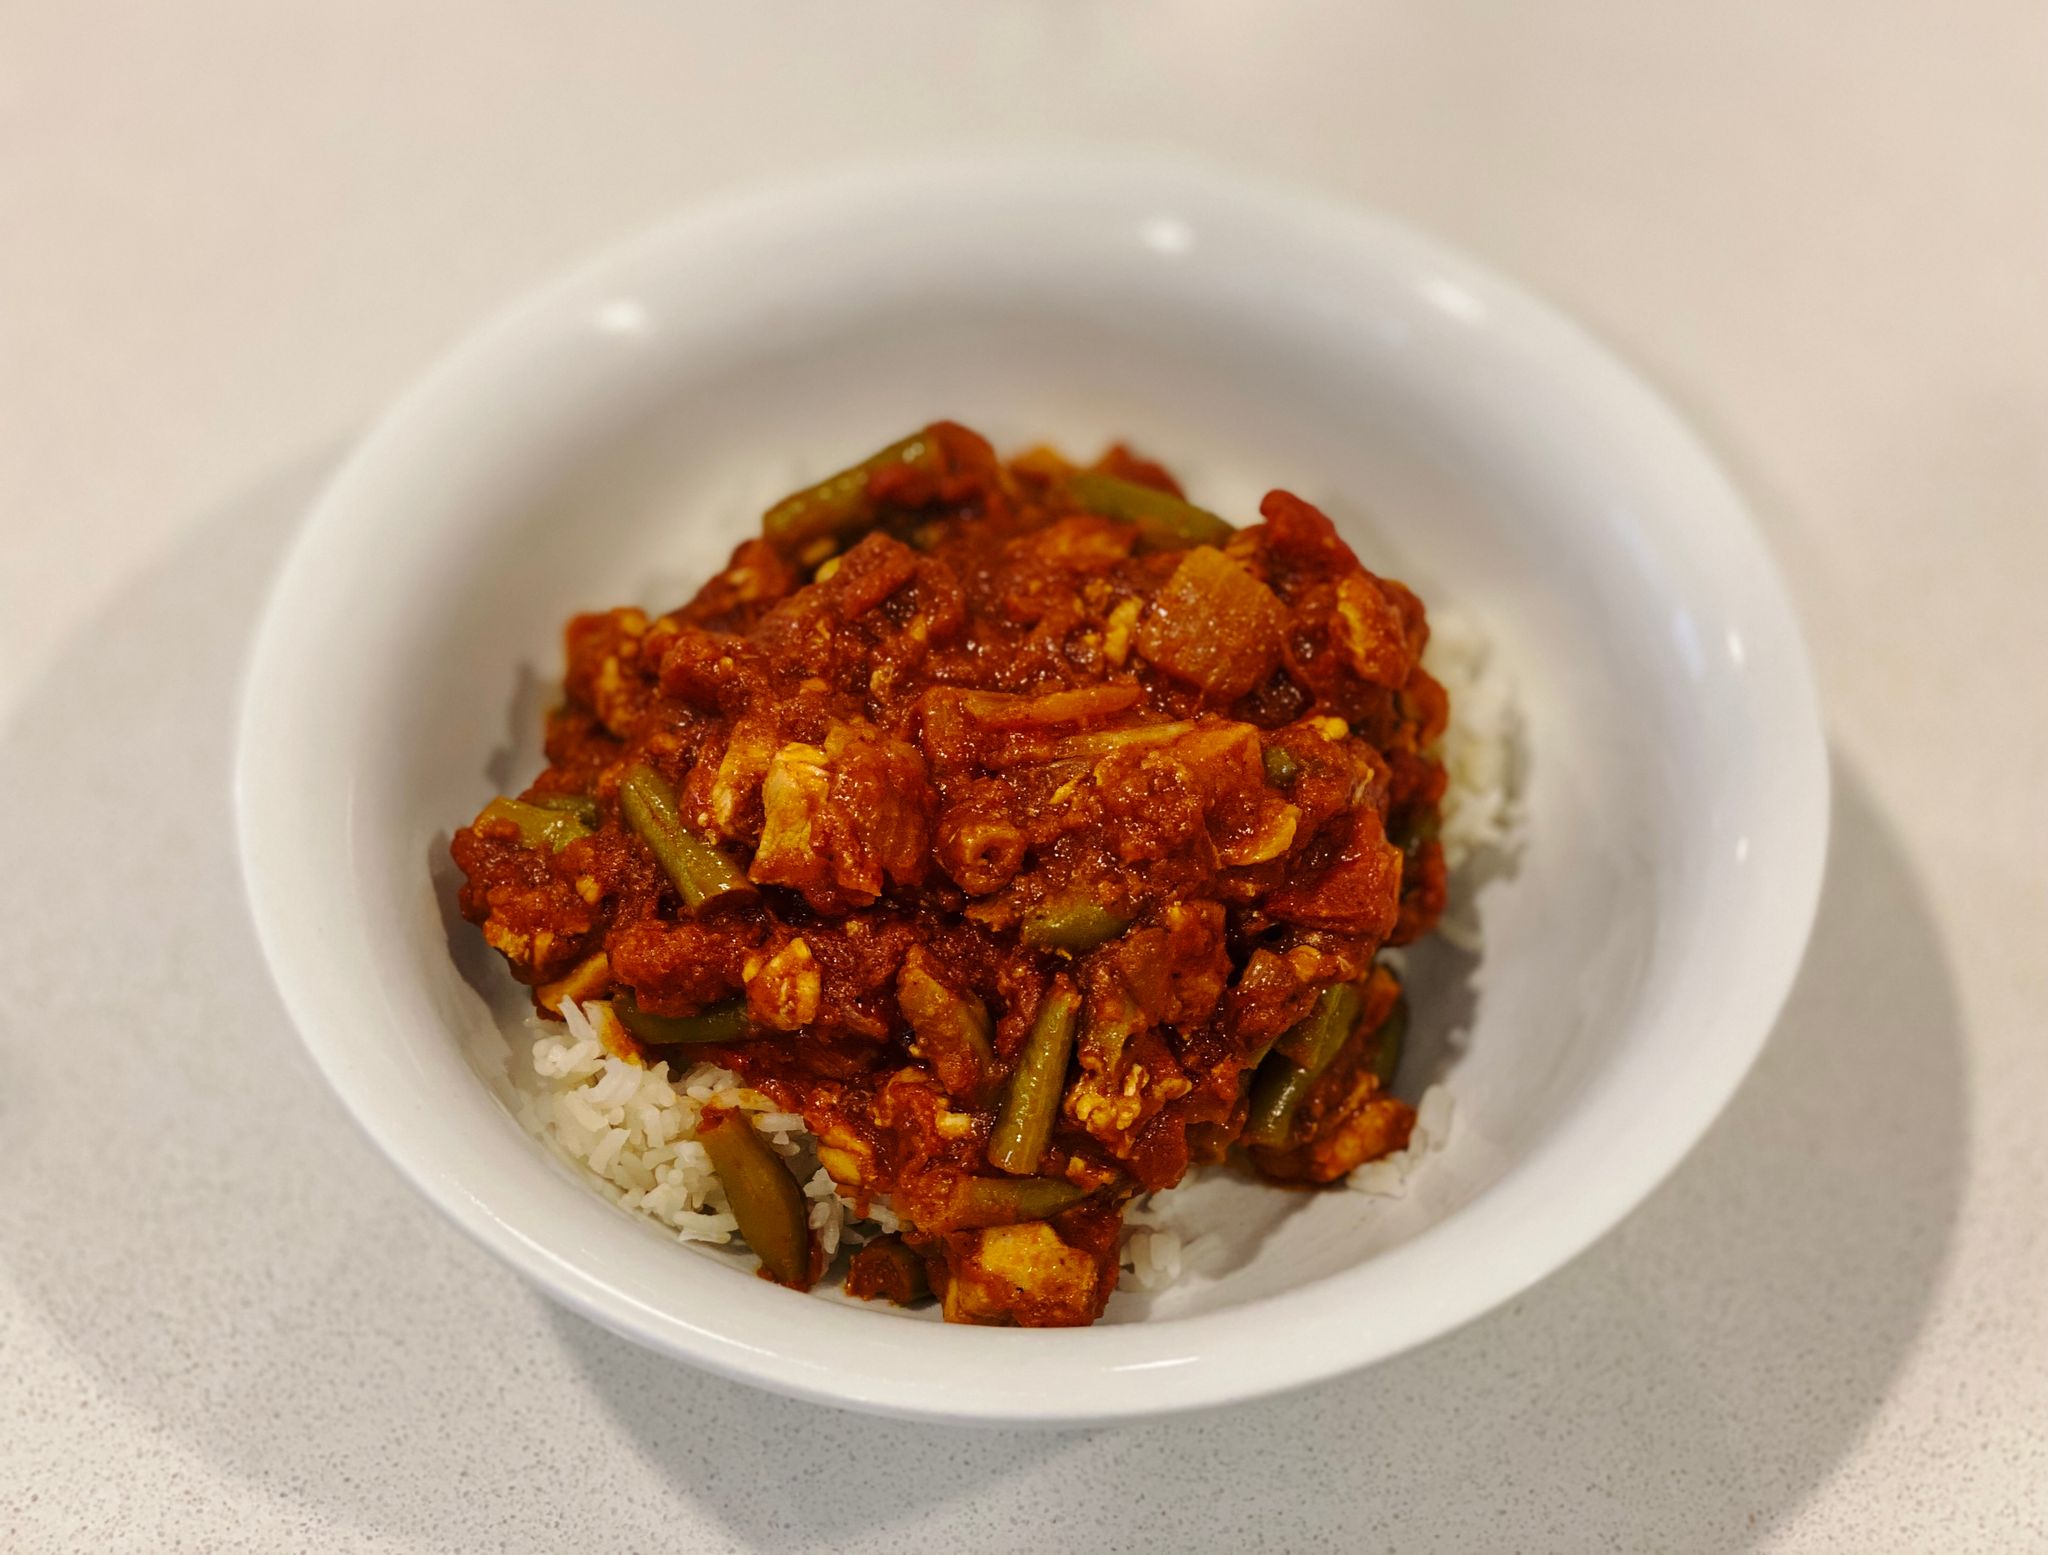 A photo of a bowl of tomato-based Indian chicken curry with green beans in it.